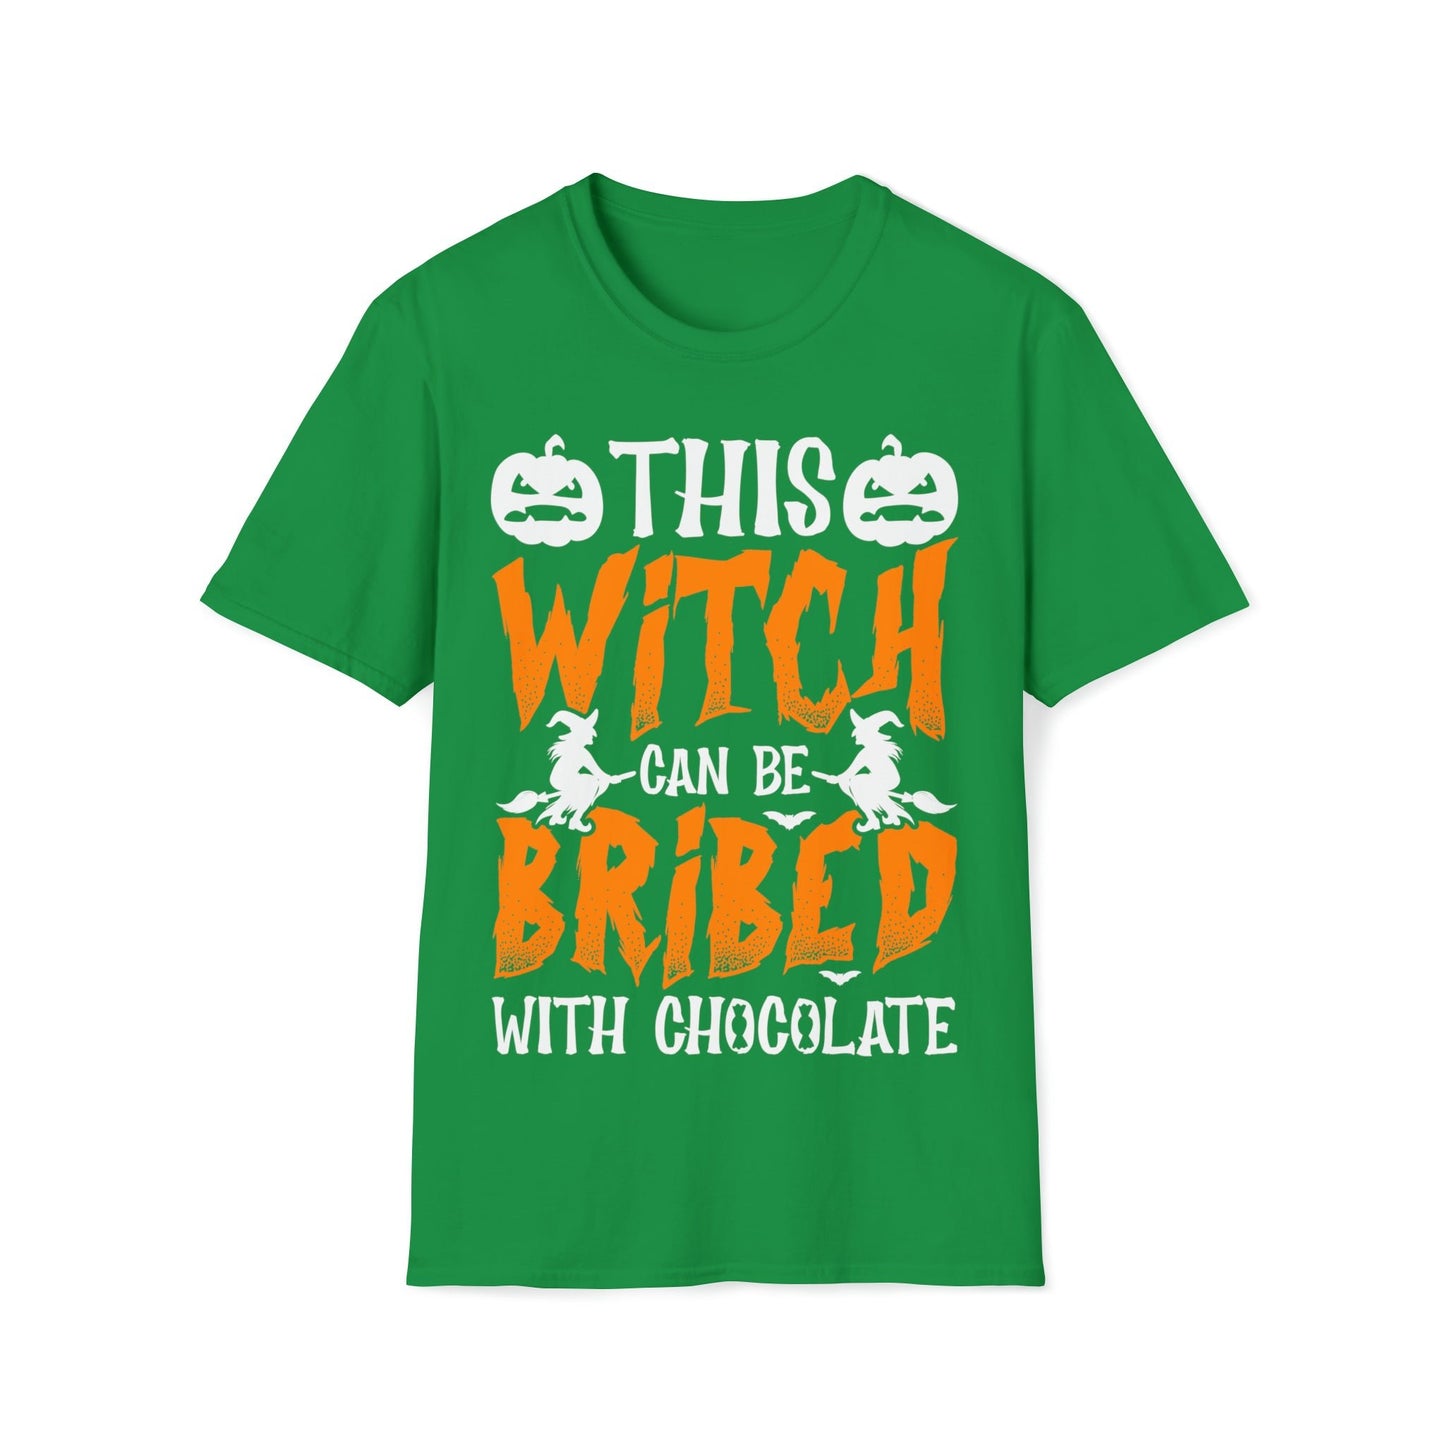 This Witch Can Be Bribed with Chocolate - Unisex Softstyle T-Shirt - Ohio Custom Designs & Apparel LLC